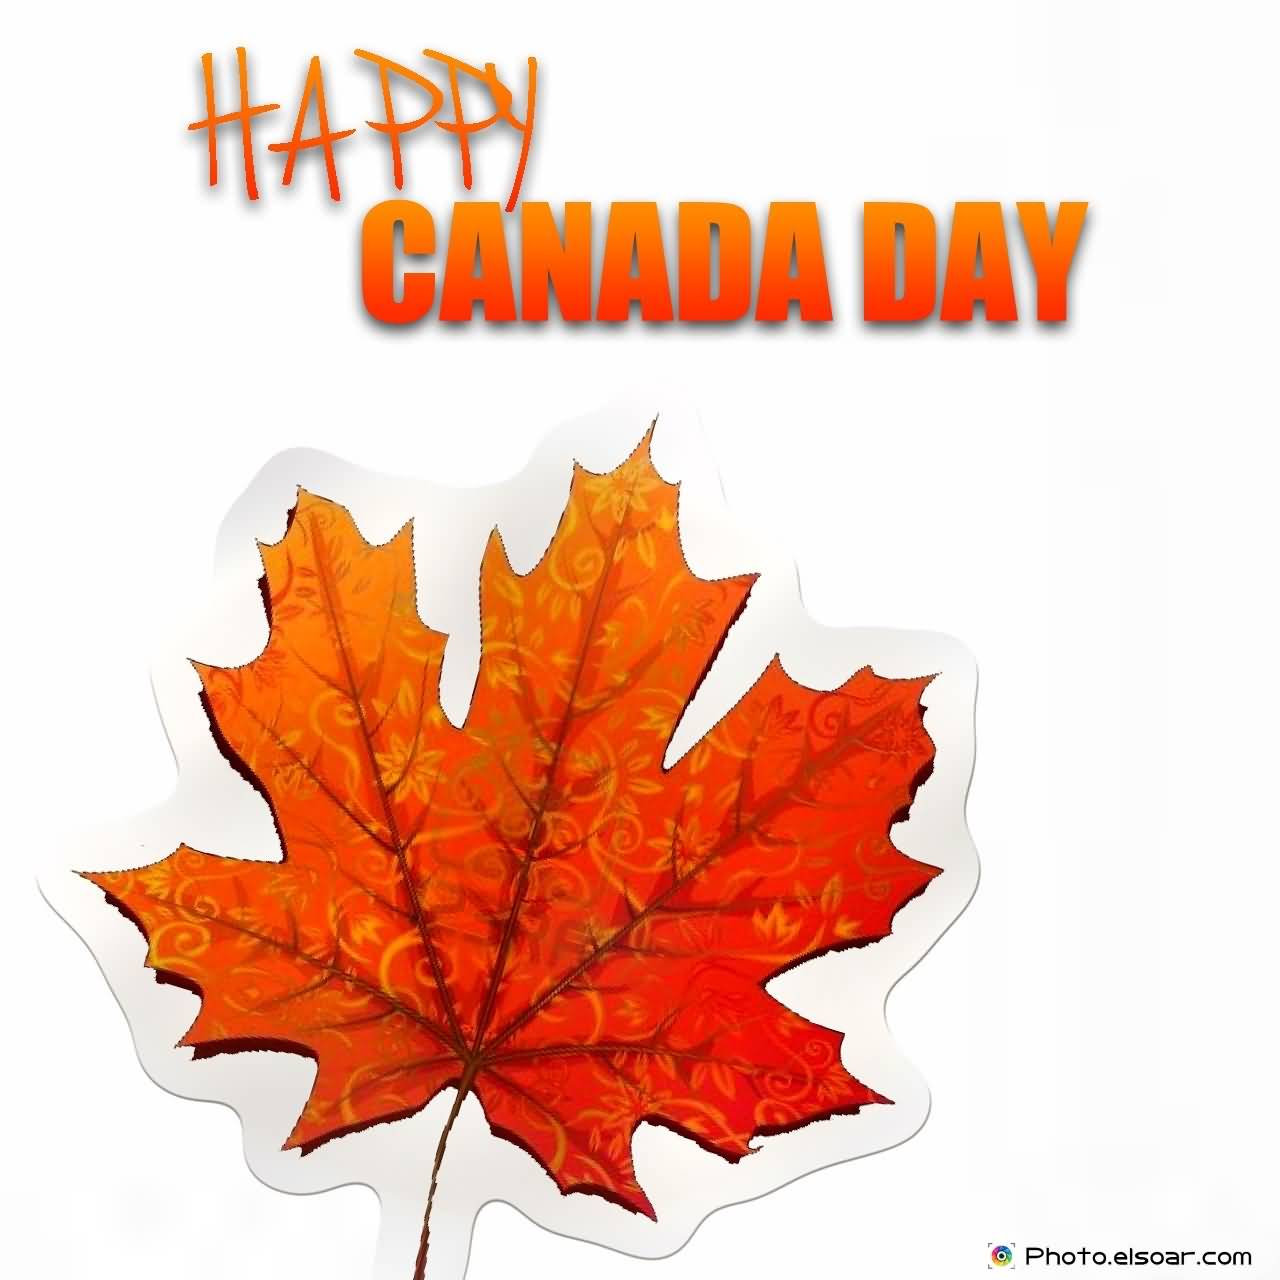 Happy Canada Day Wishes Greeting Card